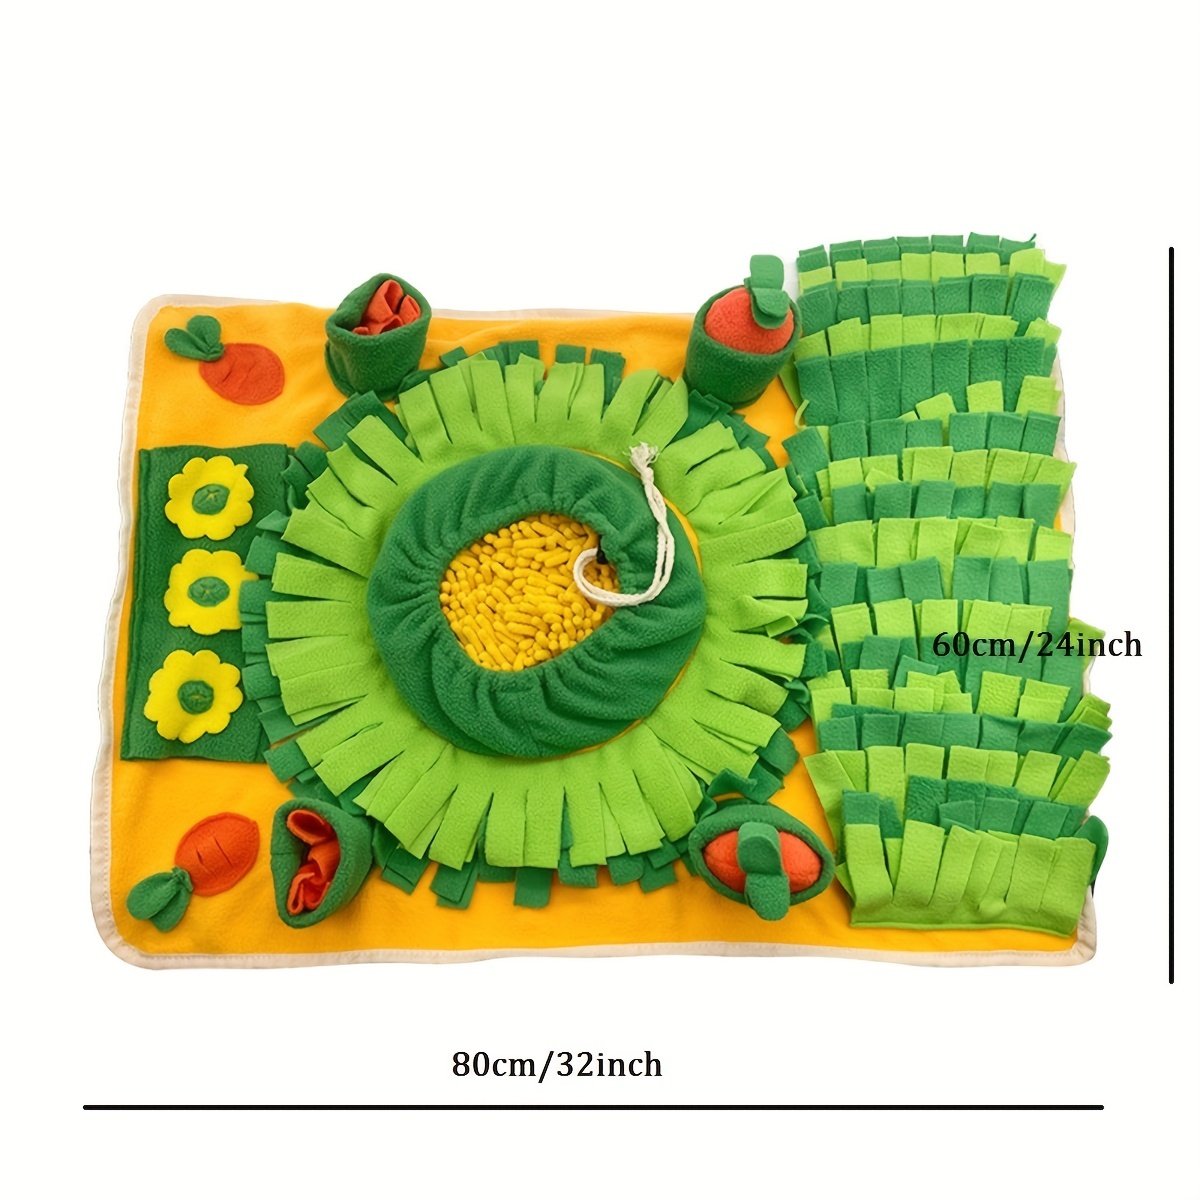 This Pizza-Themed Snuffle Mat For Dogs Is a Slice of Heaven · The Wildest